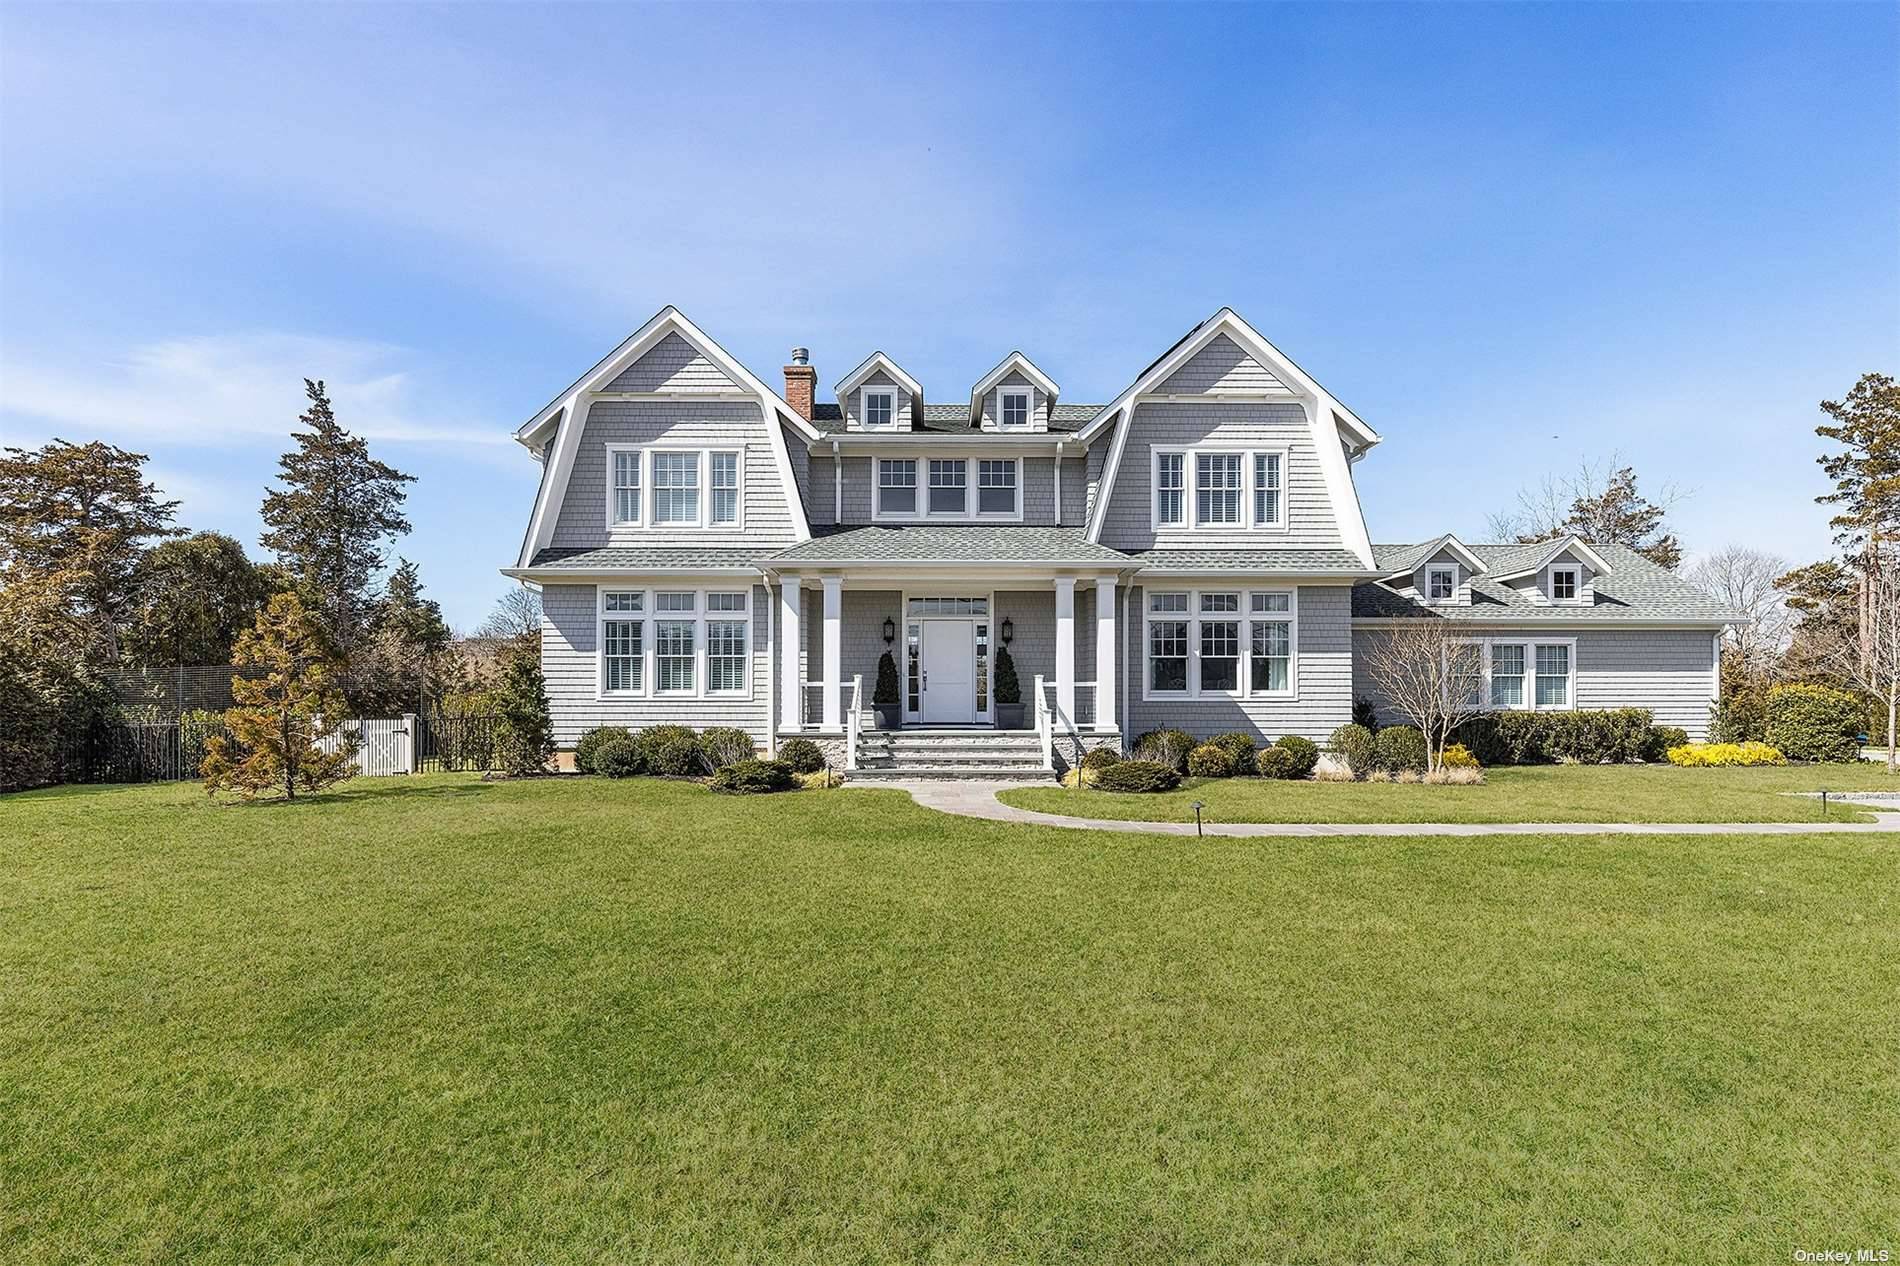 Located in the highly desirable estate section of Quogue Village, this elegant residence blends classic Hamptons style with modern functionality and amenities.